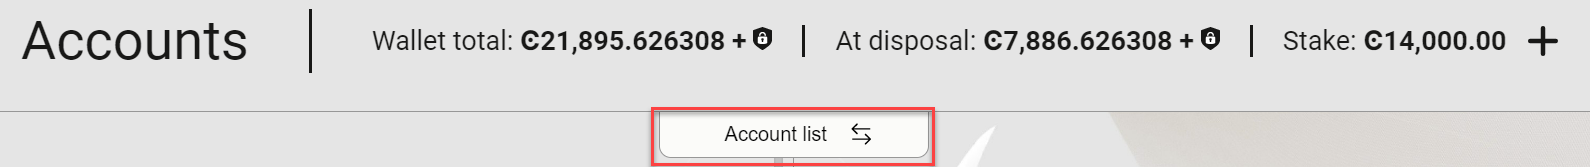 wallet balance area with account list button shown